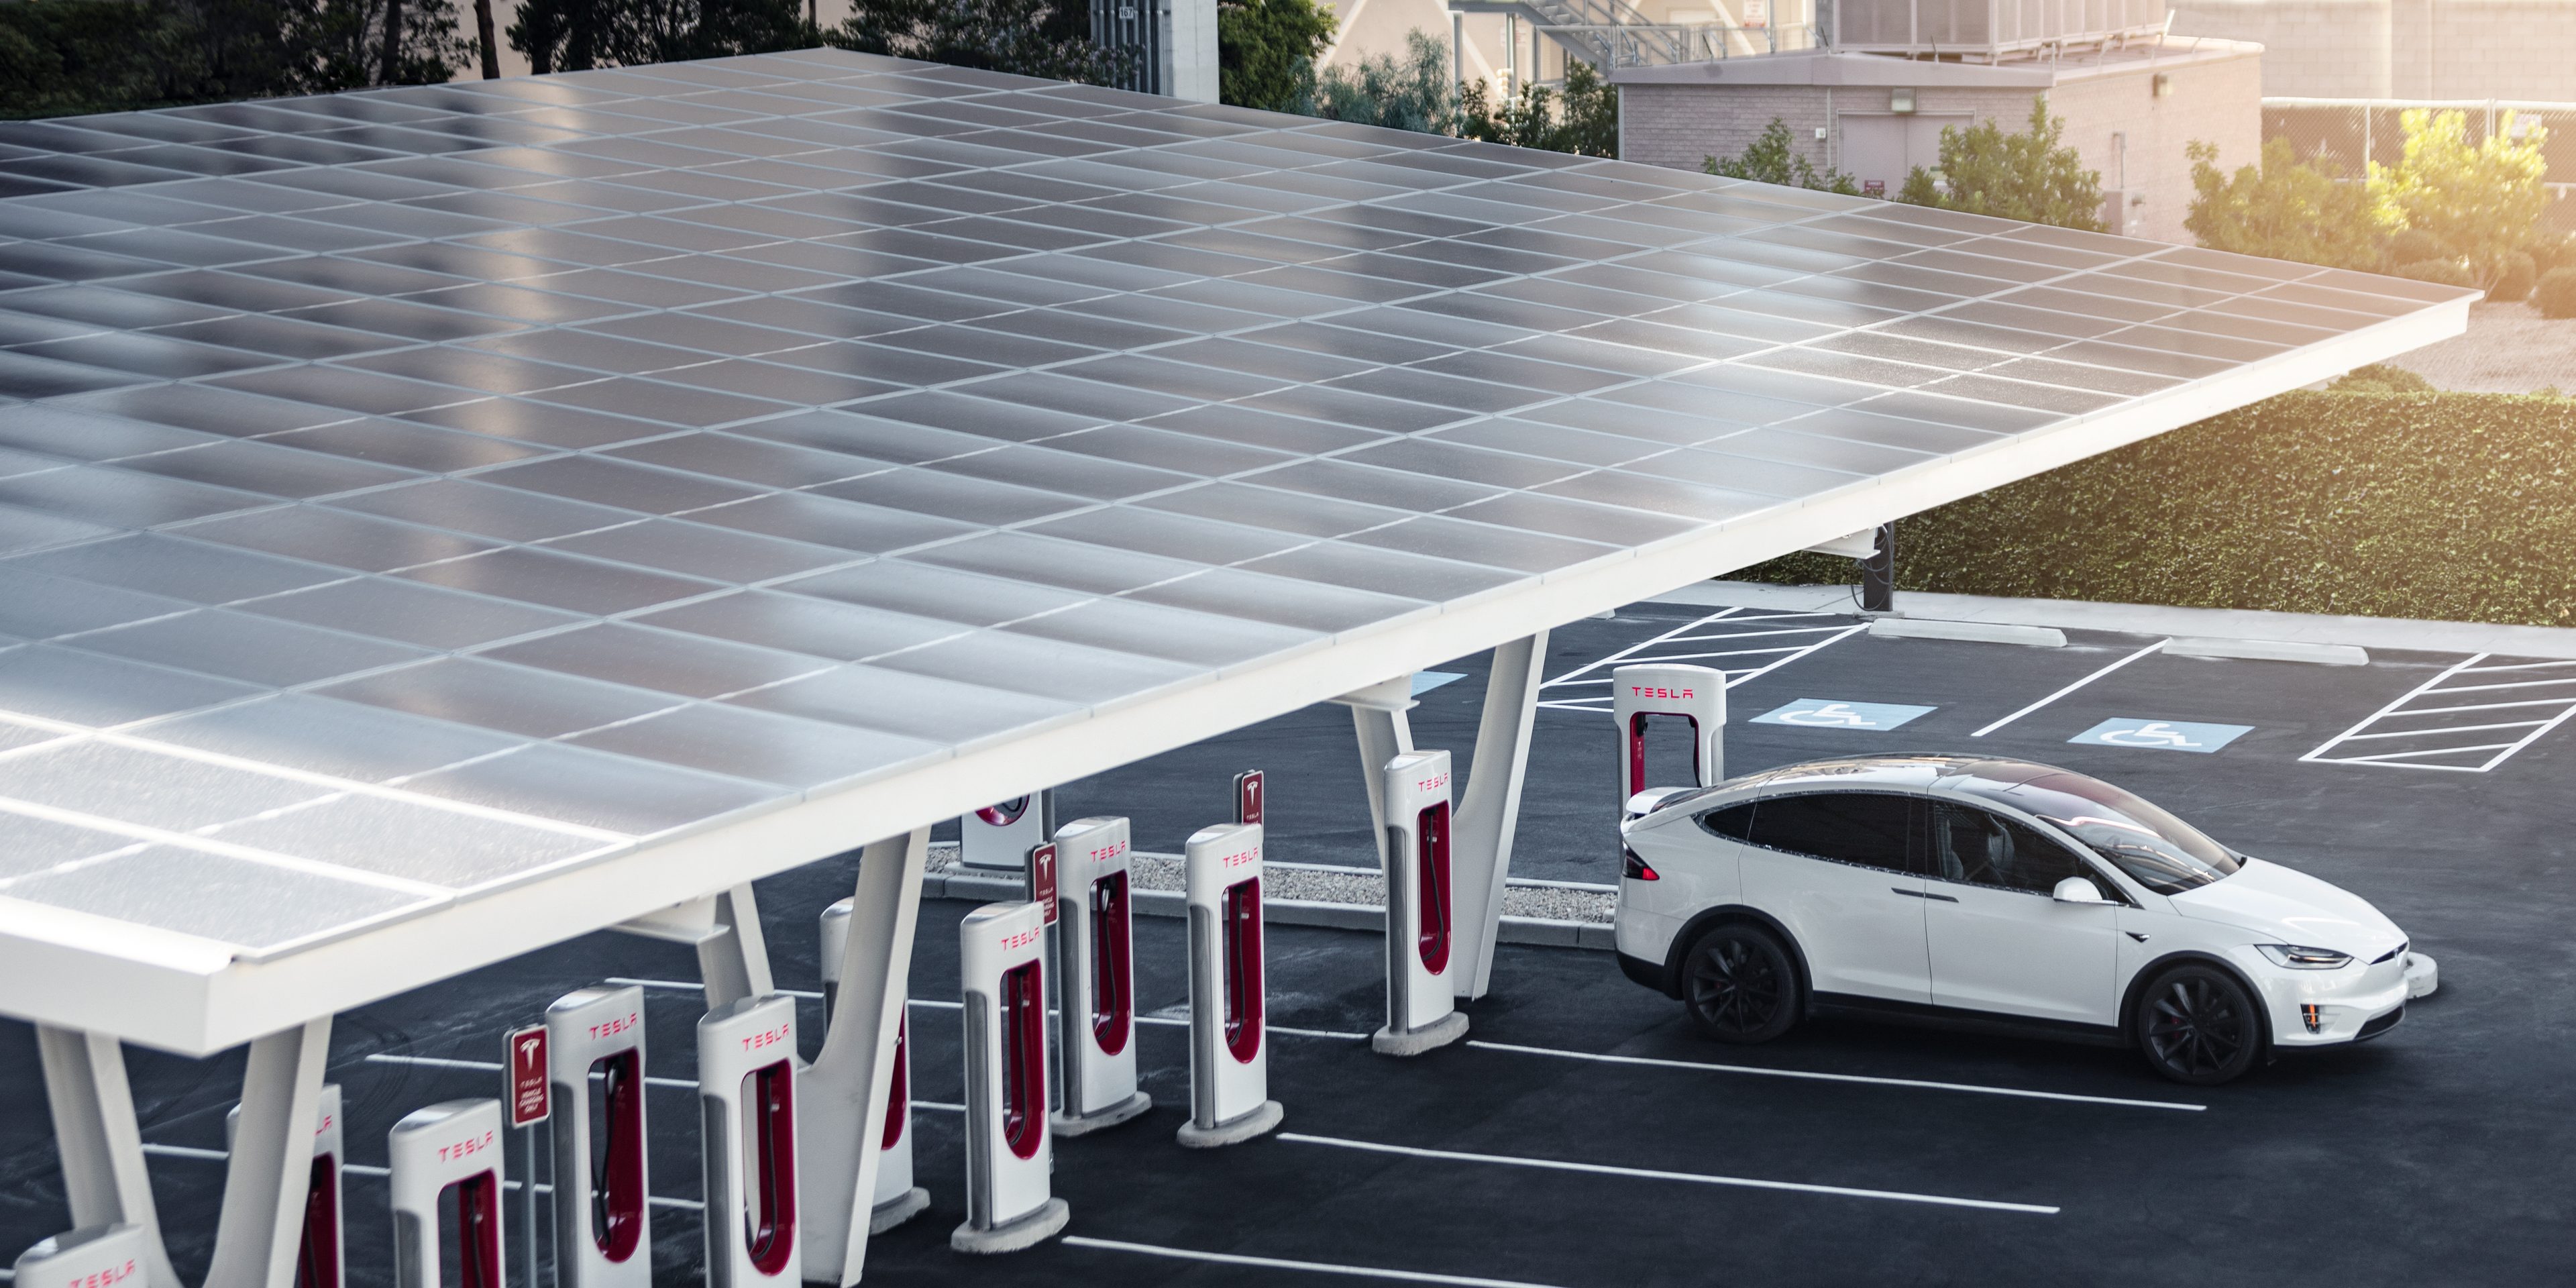 Tesla says it will power all Superchargers with renewable energy ...